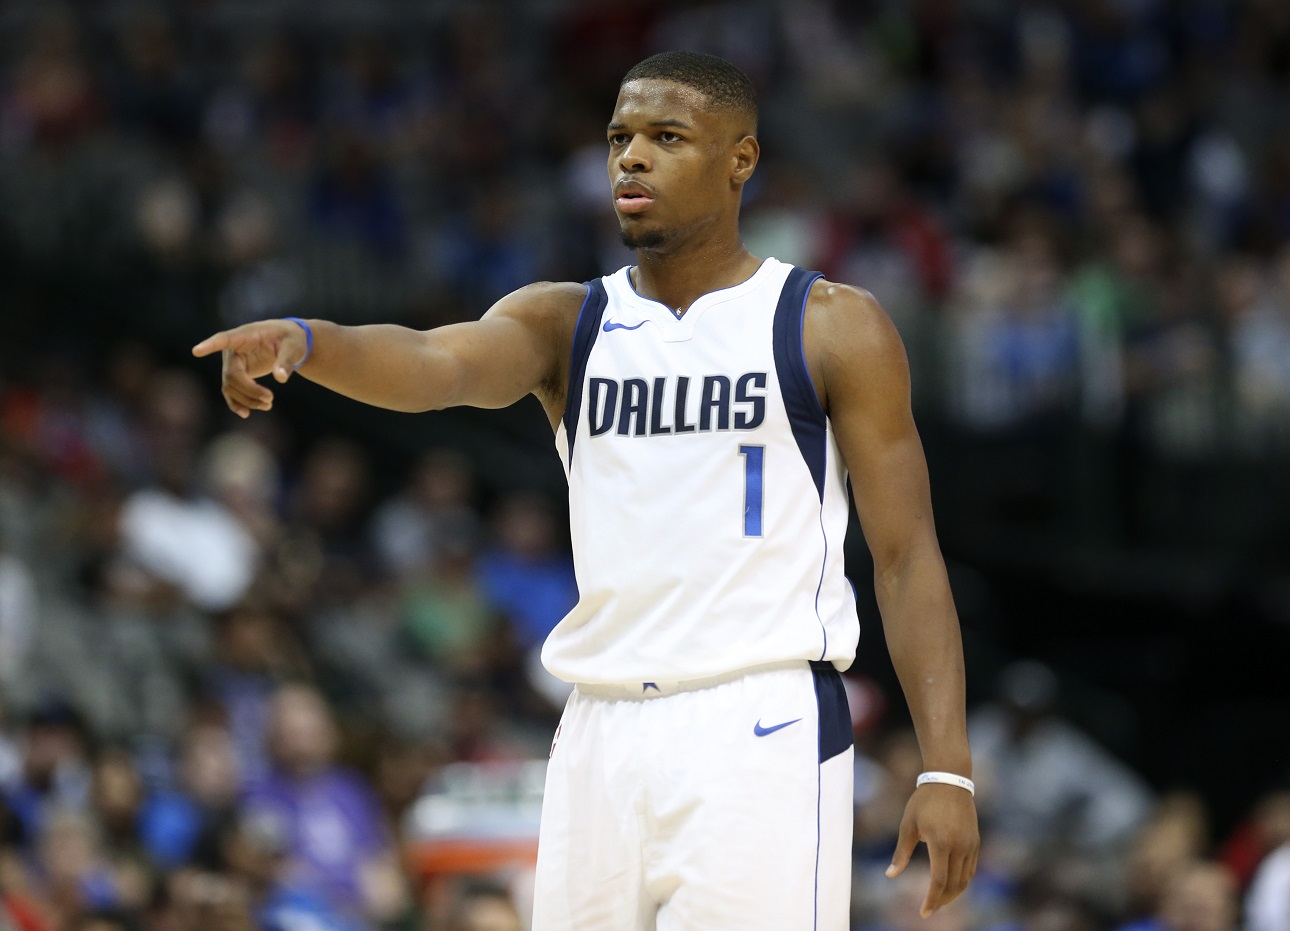 Dennis Smith Jr. is changing his jersey number in order to regain